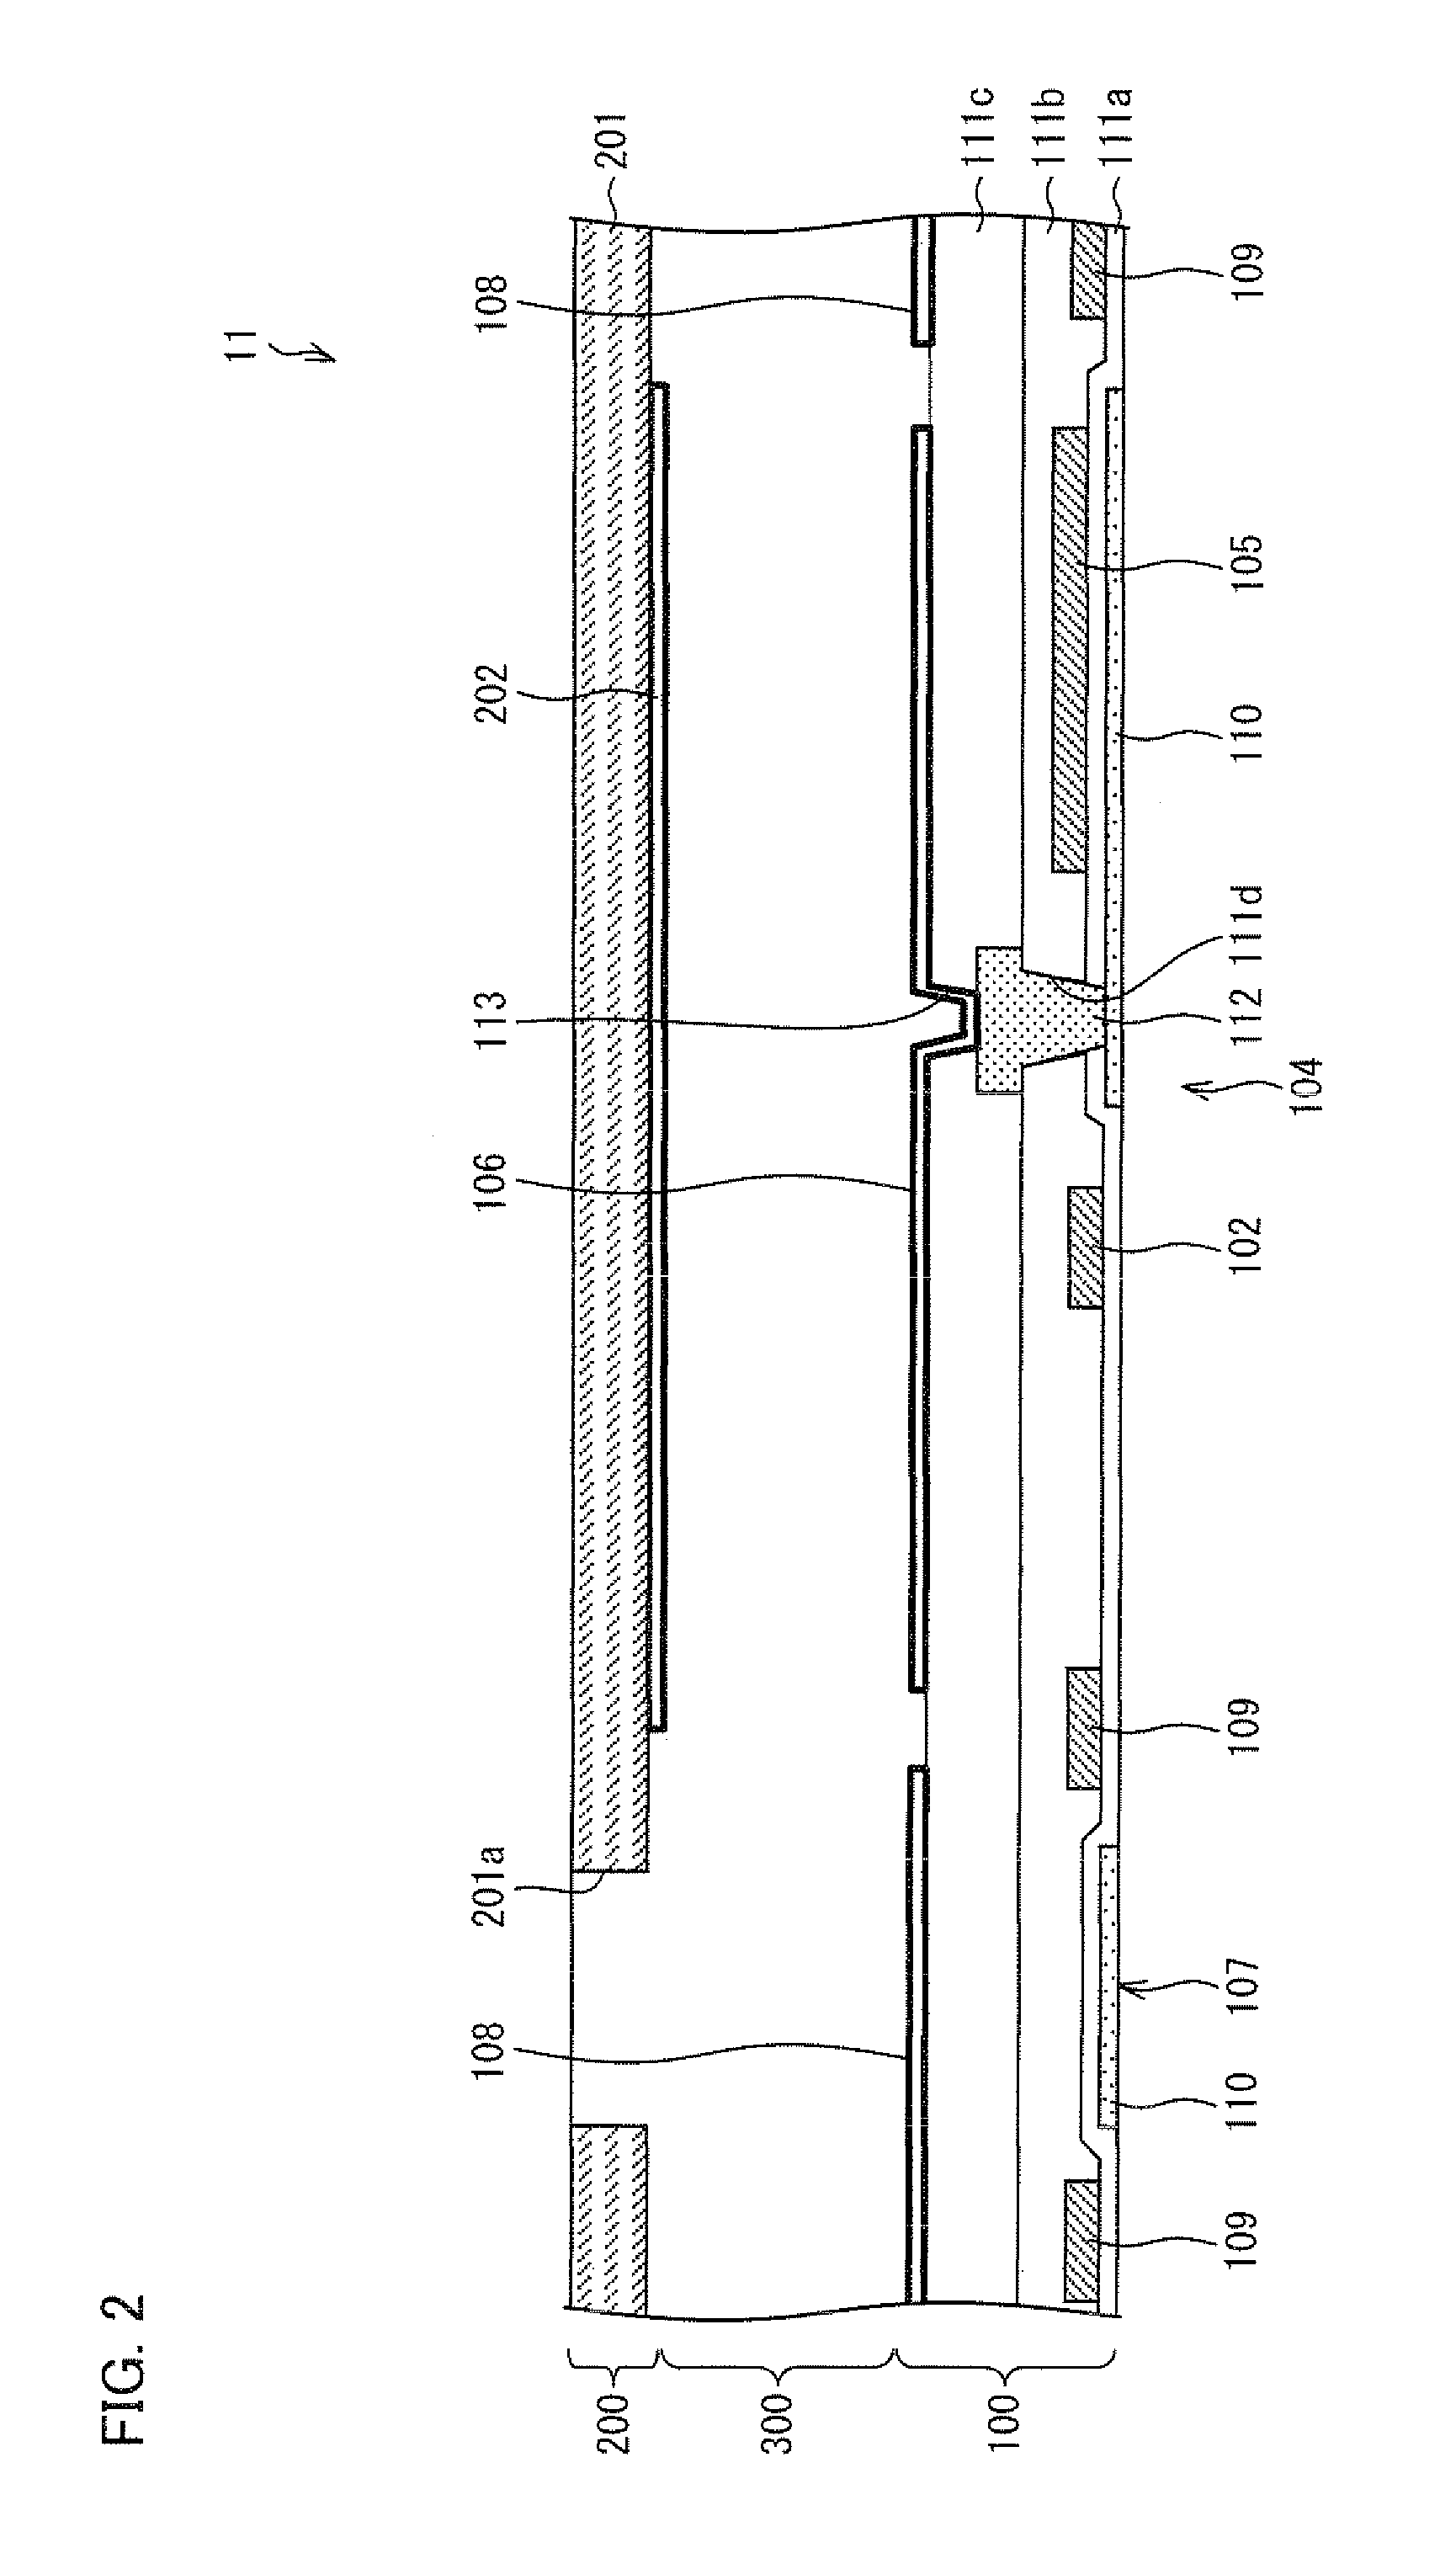 Display device and active matrix substrate